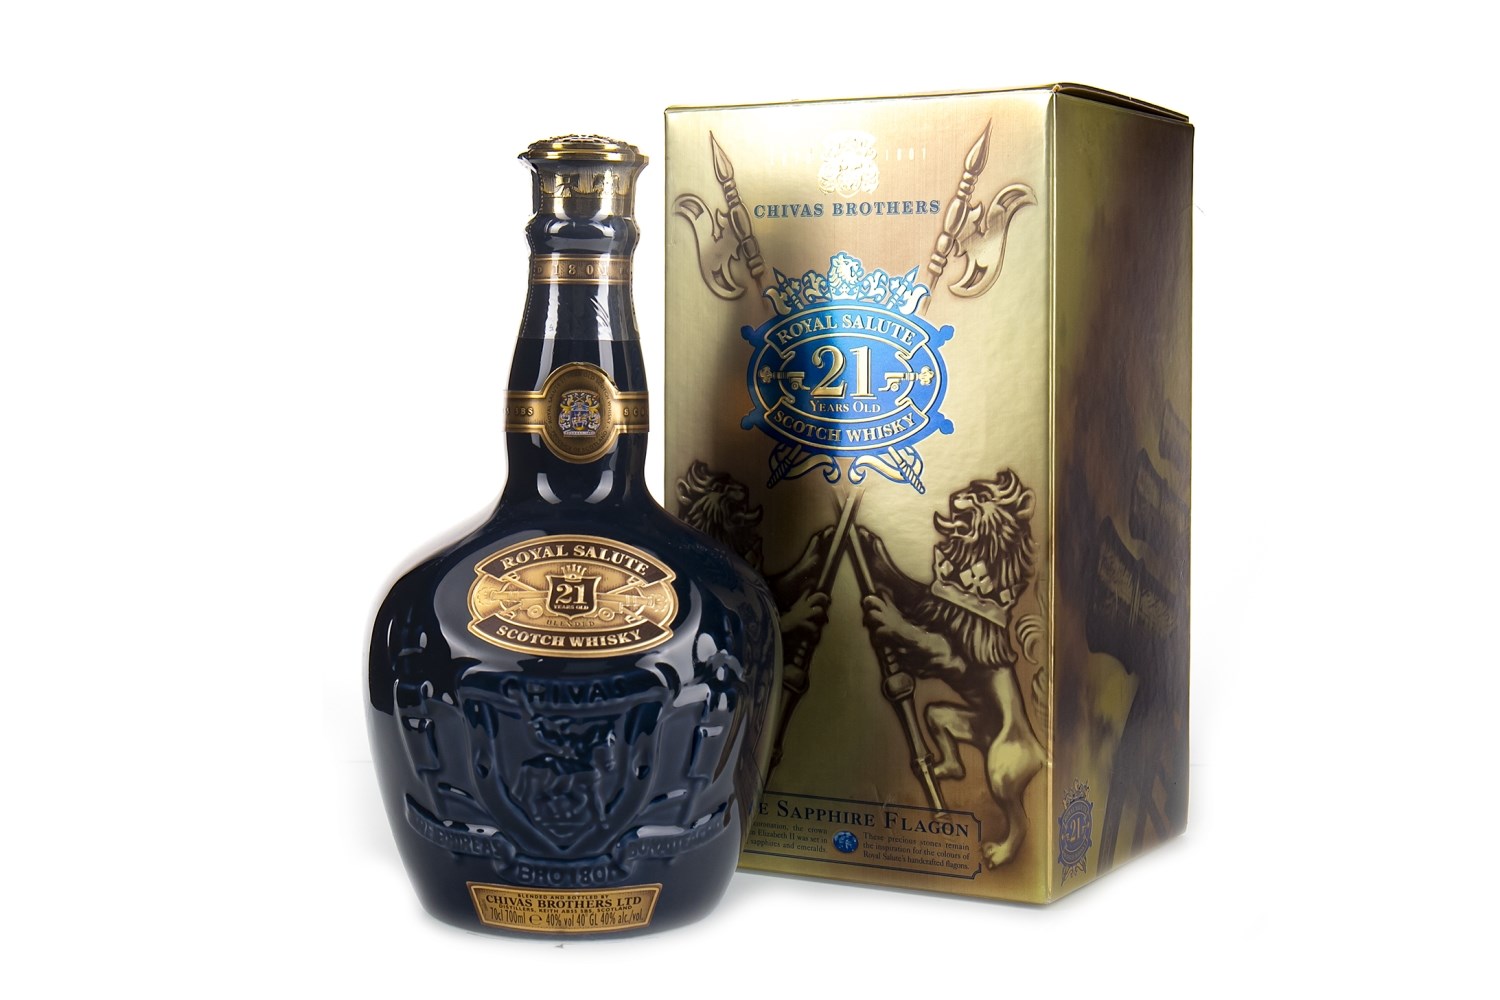 ROYAL SALUTE AGED 21 YEARS - SAPPHIRE DECANTER